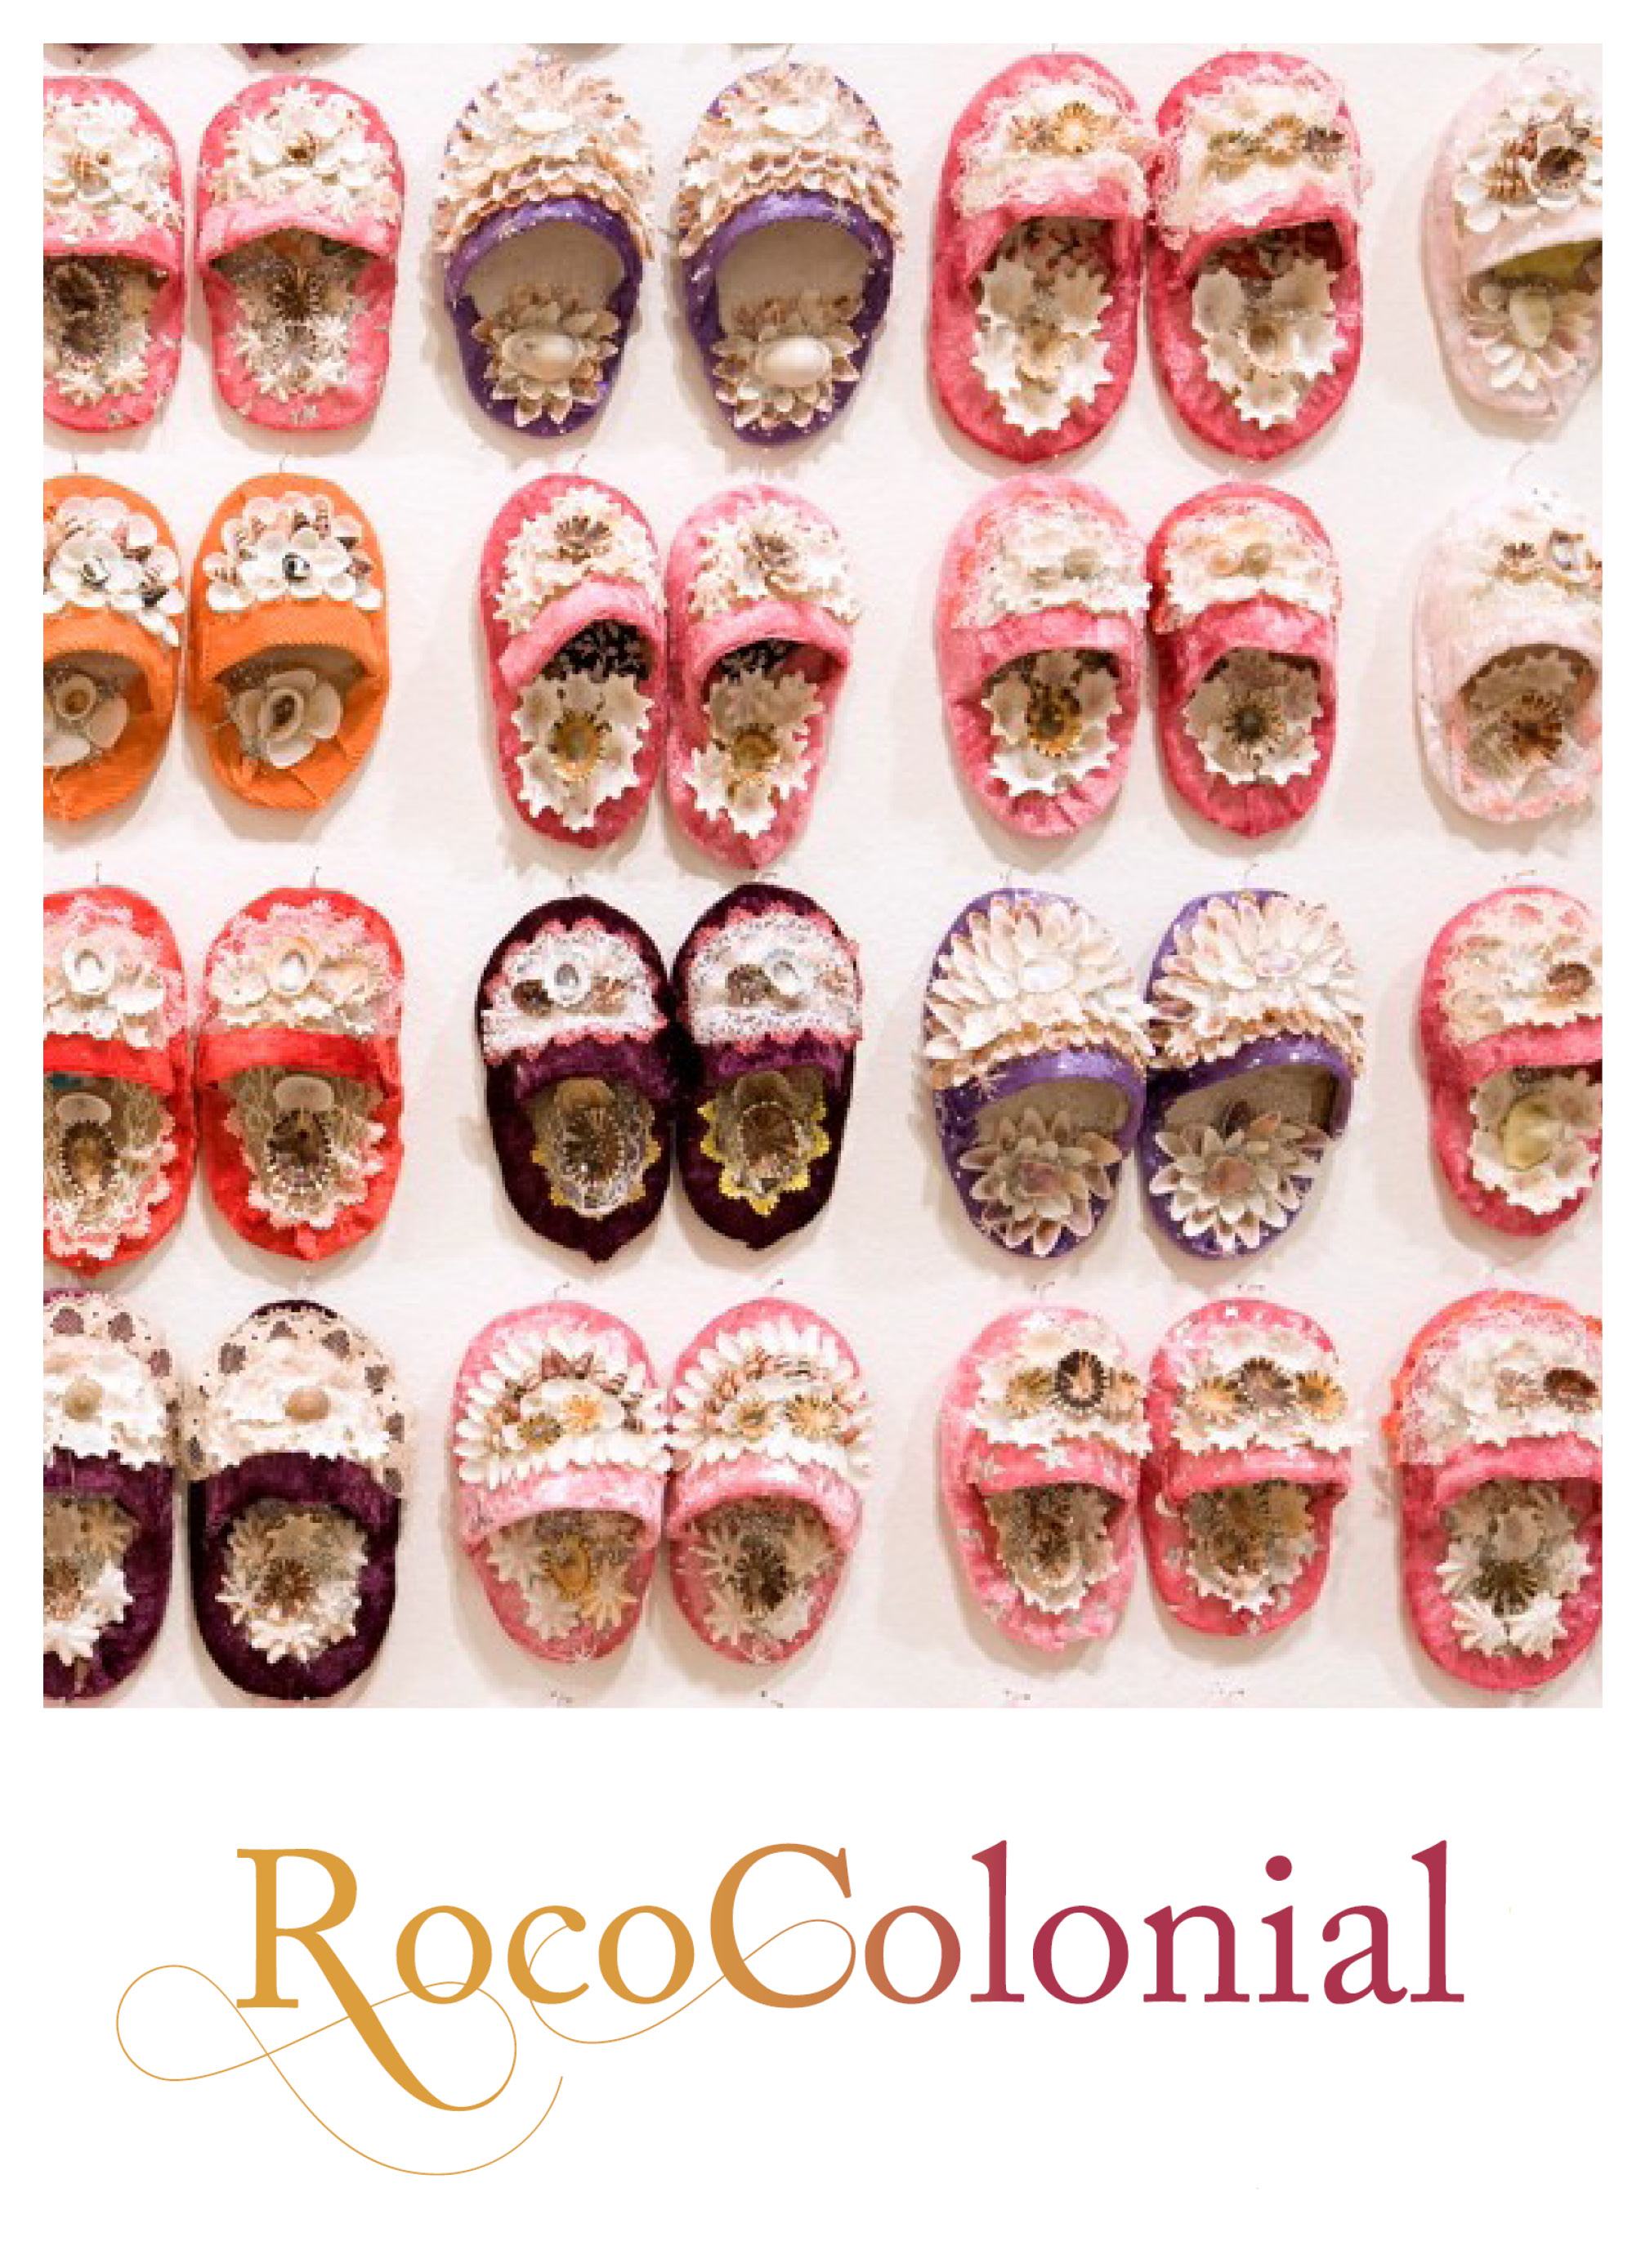 The cover of an exhibition catalogue featuring a photograph of sixteen pairs of shellwork baby shoes mounted in a grid on a wall. The baby shoes are in colours of pink, red and dark red and are by the Bidgigal artist Esme Timbery. The photograph takes up 3/4 of the cover and beneath is, on a white background the exhibition title 'Rococolonial' is written in a decorative font and colored with a gradient of yellow to red that runs across the word.